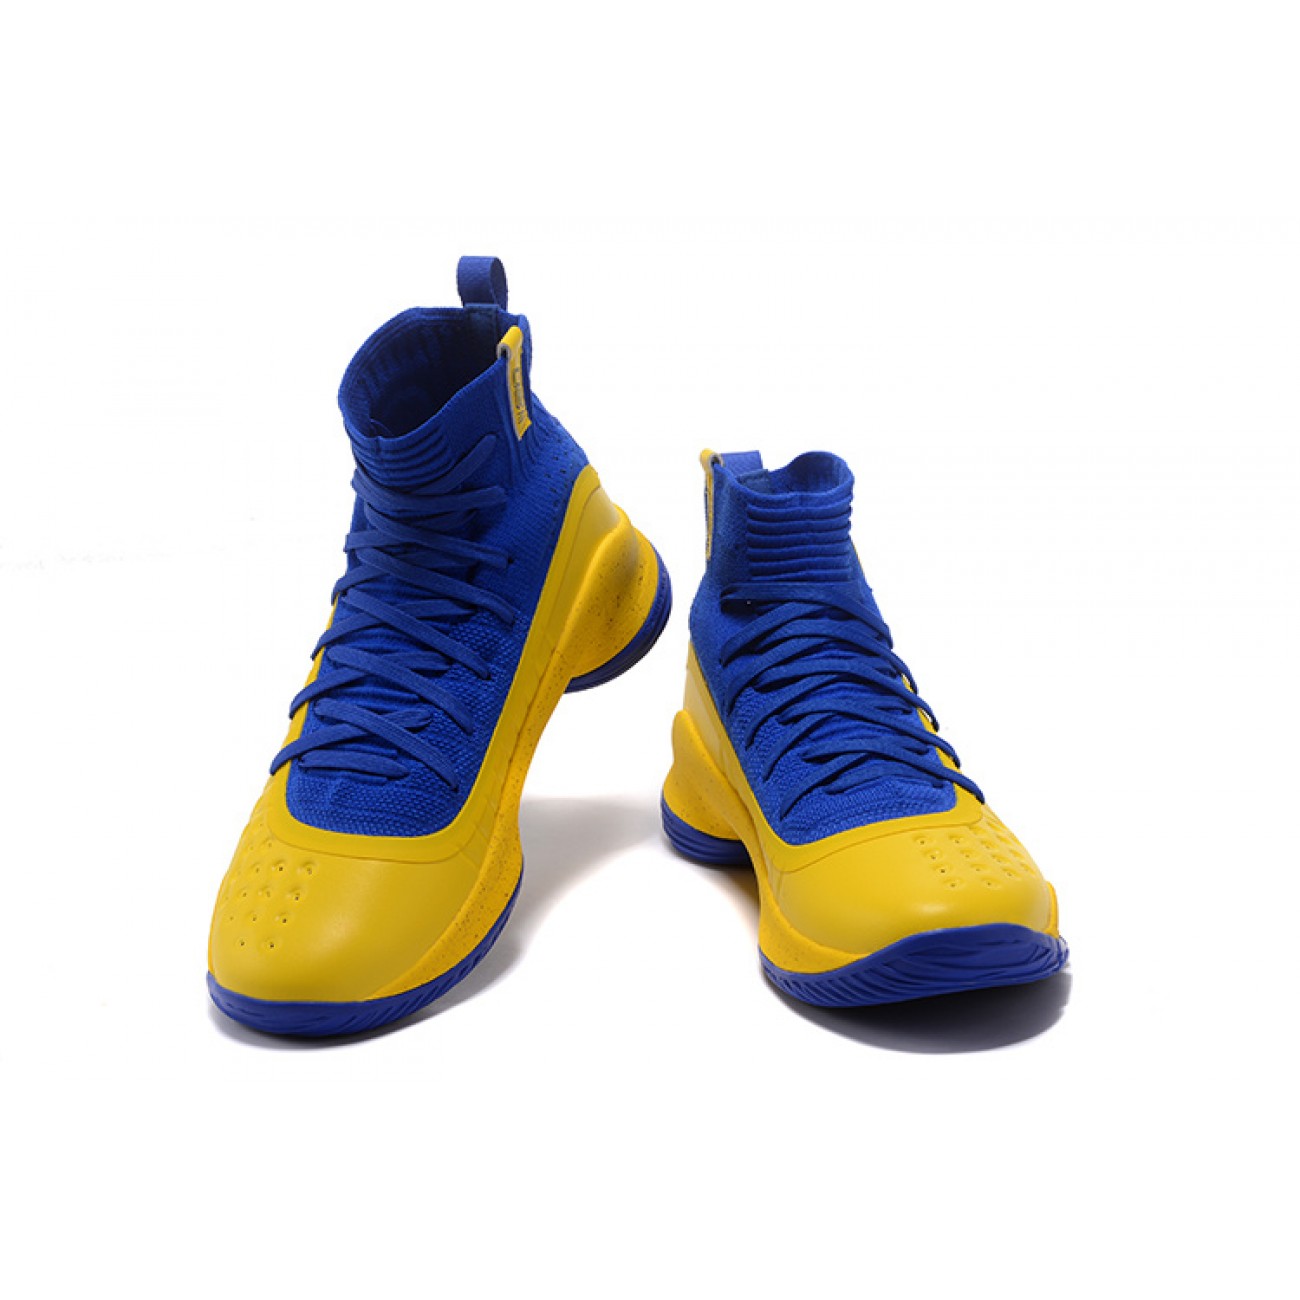 Under Armour UA Curry 4 Yellow/Blue